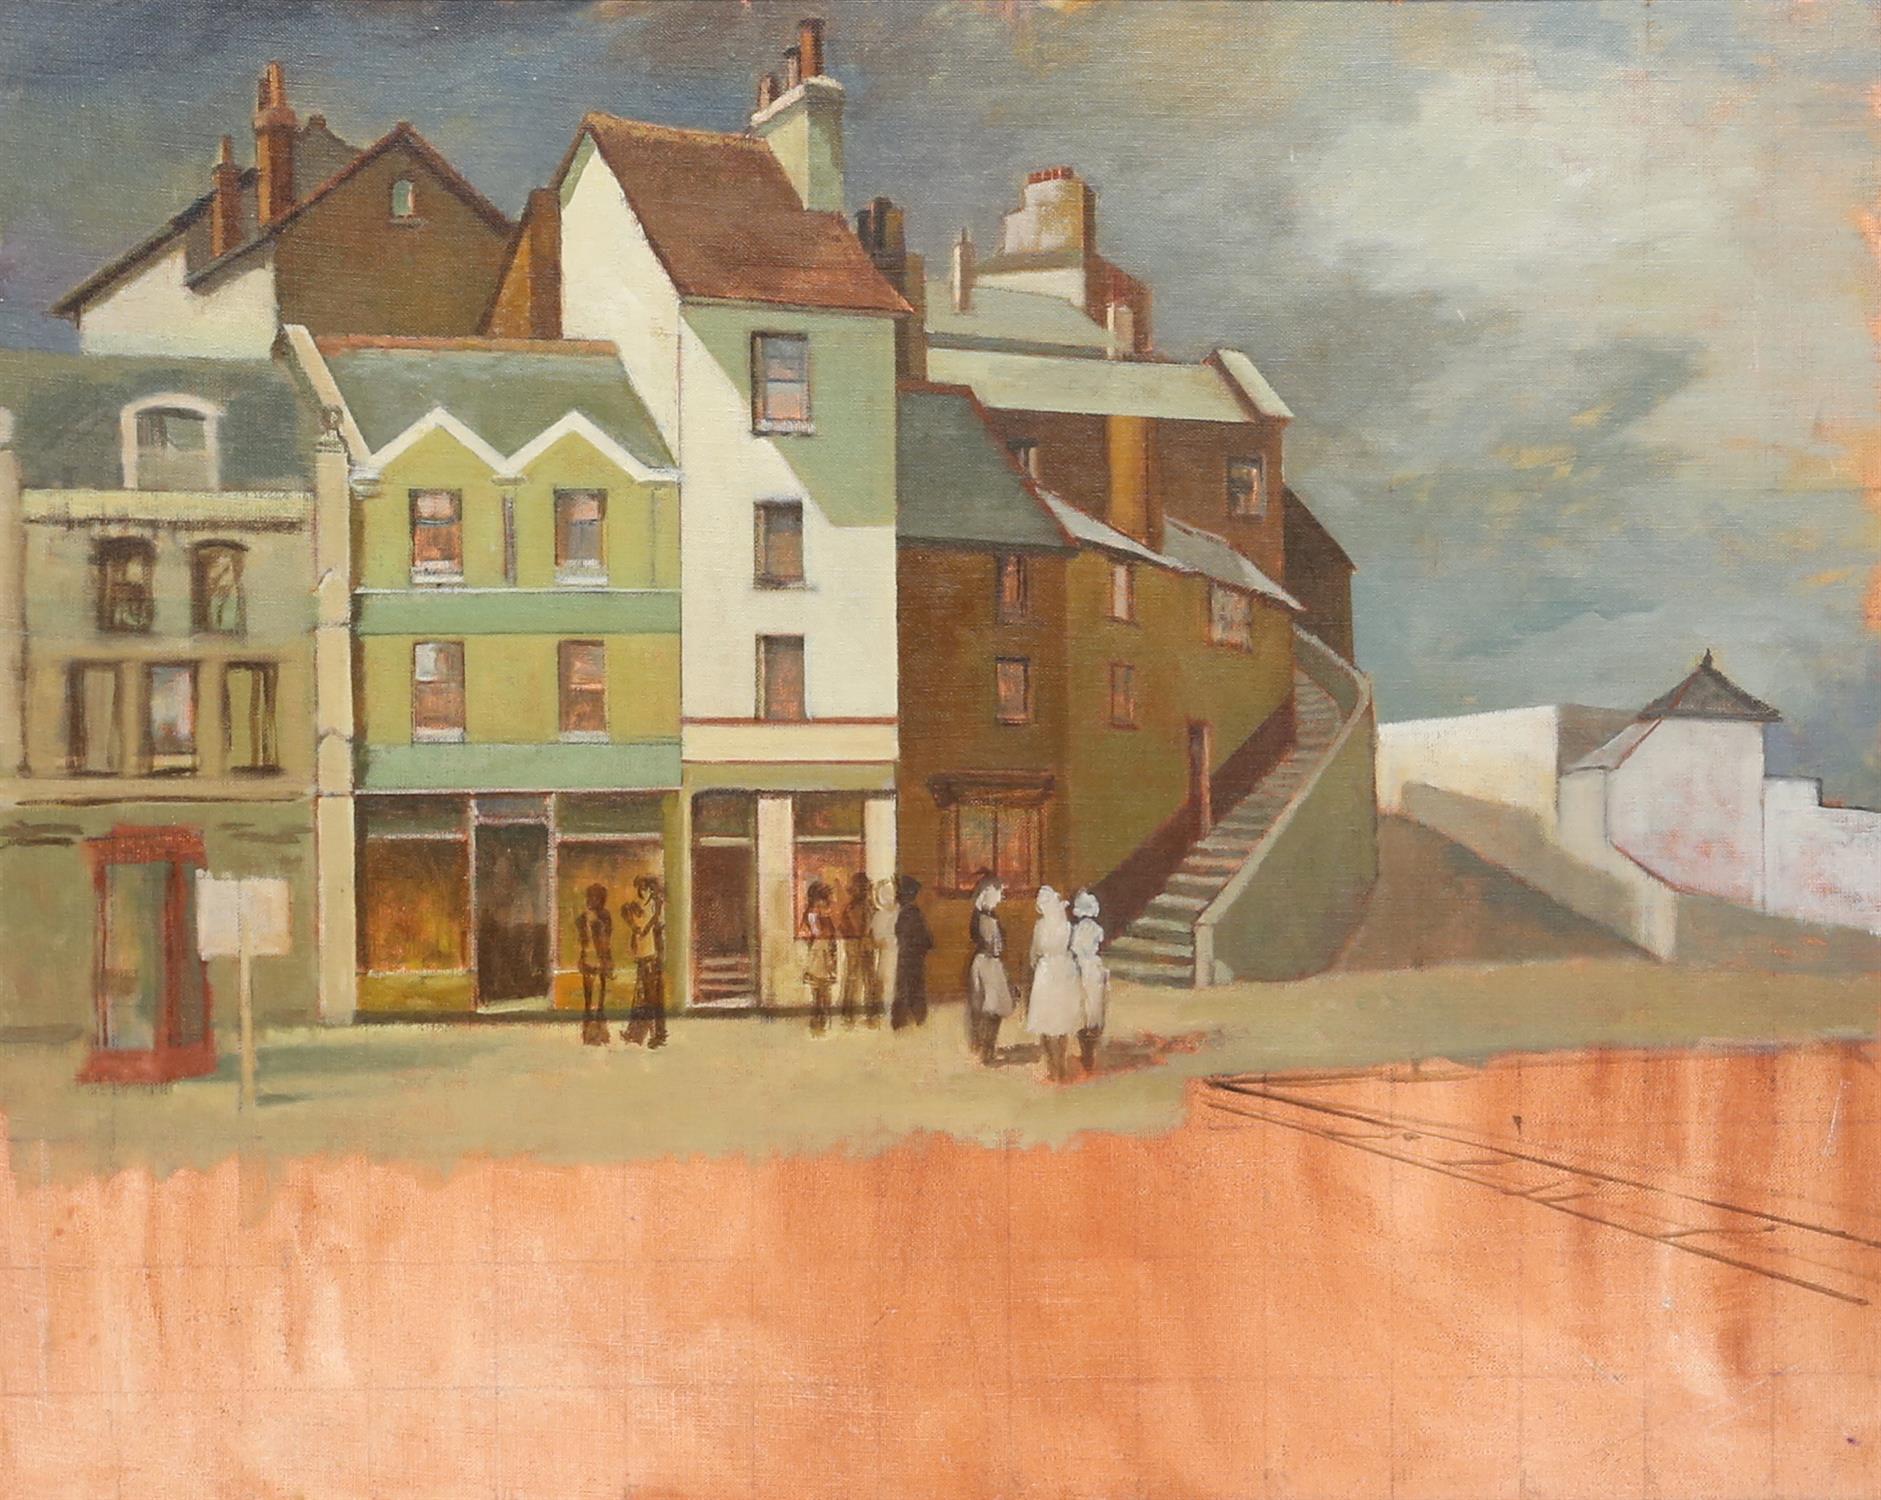 Clifford Charman, (British 1910-1992), Town view in Southern England with people,